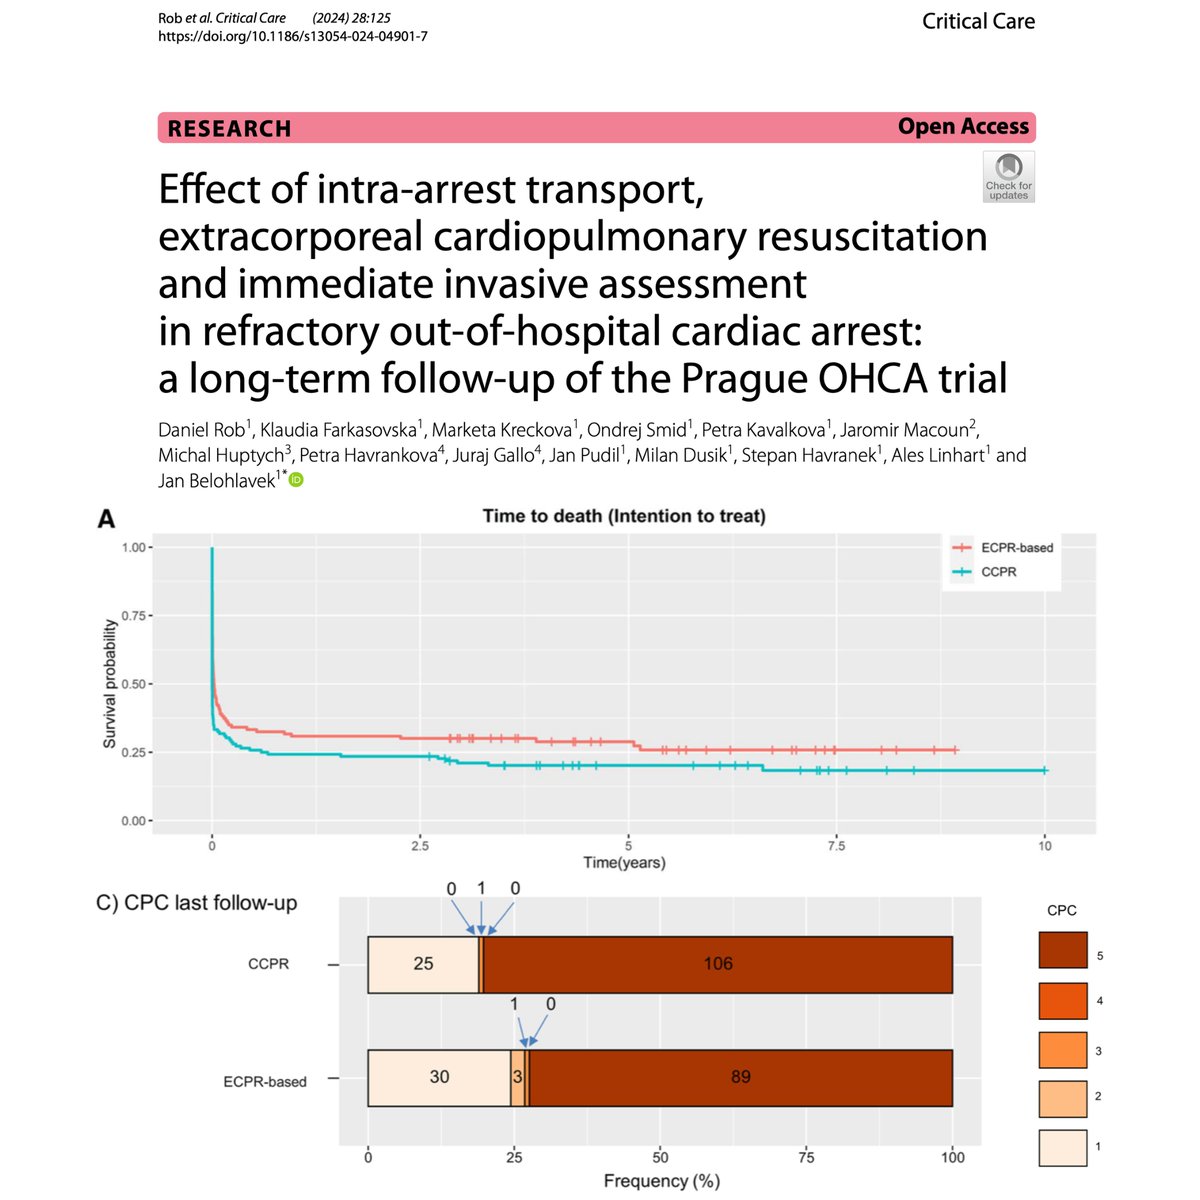 Among patients with refractory OHCA, #ECPR significantly improved long-term survival in the Prague OHCA trial. There were no differences in the neurological outcome, major cardiovascular events and QoL between the groups. 🔗 @Crit_Care ccforum.biomedcentral.com/articles/10.11… @jan_belohlavek